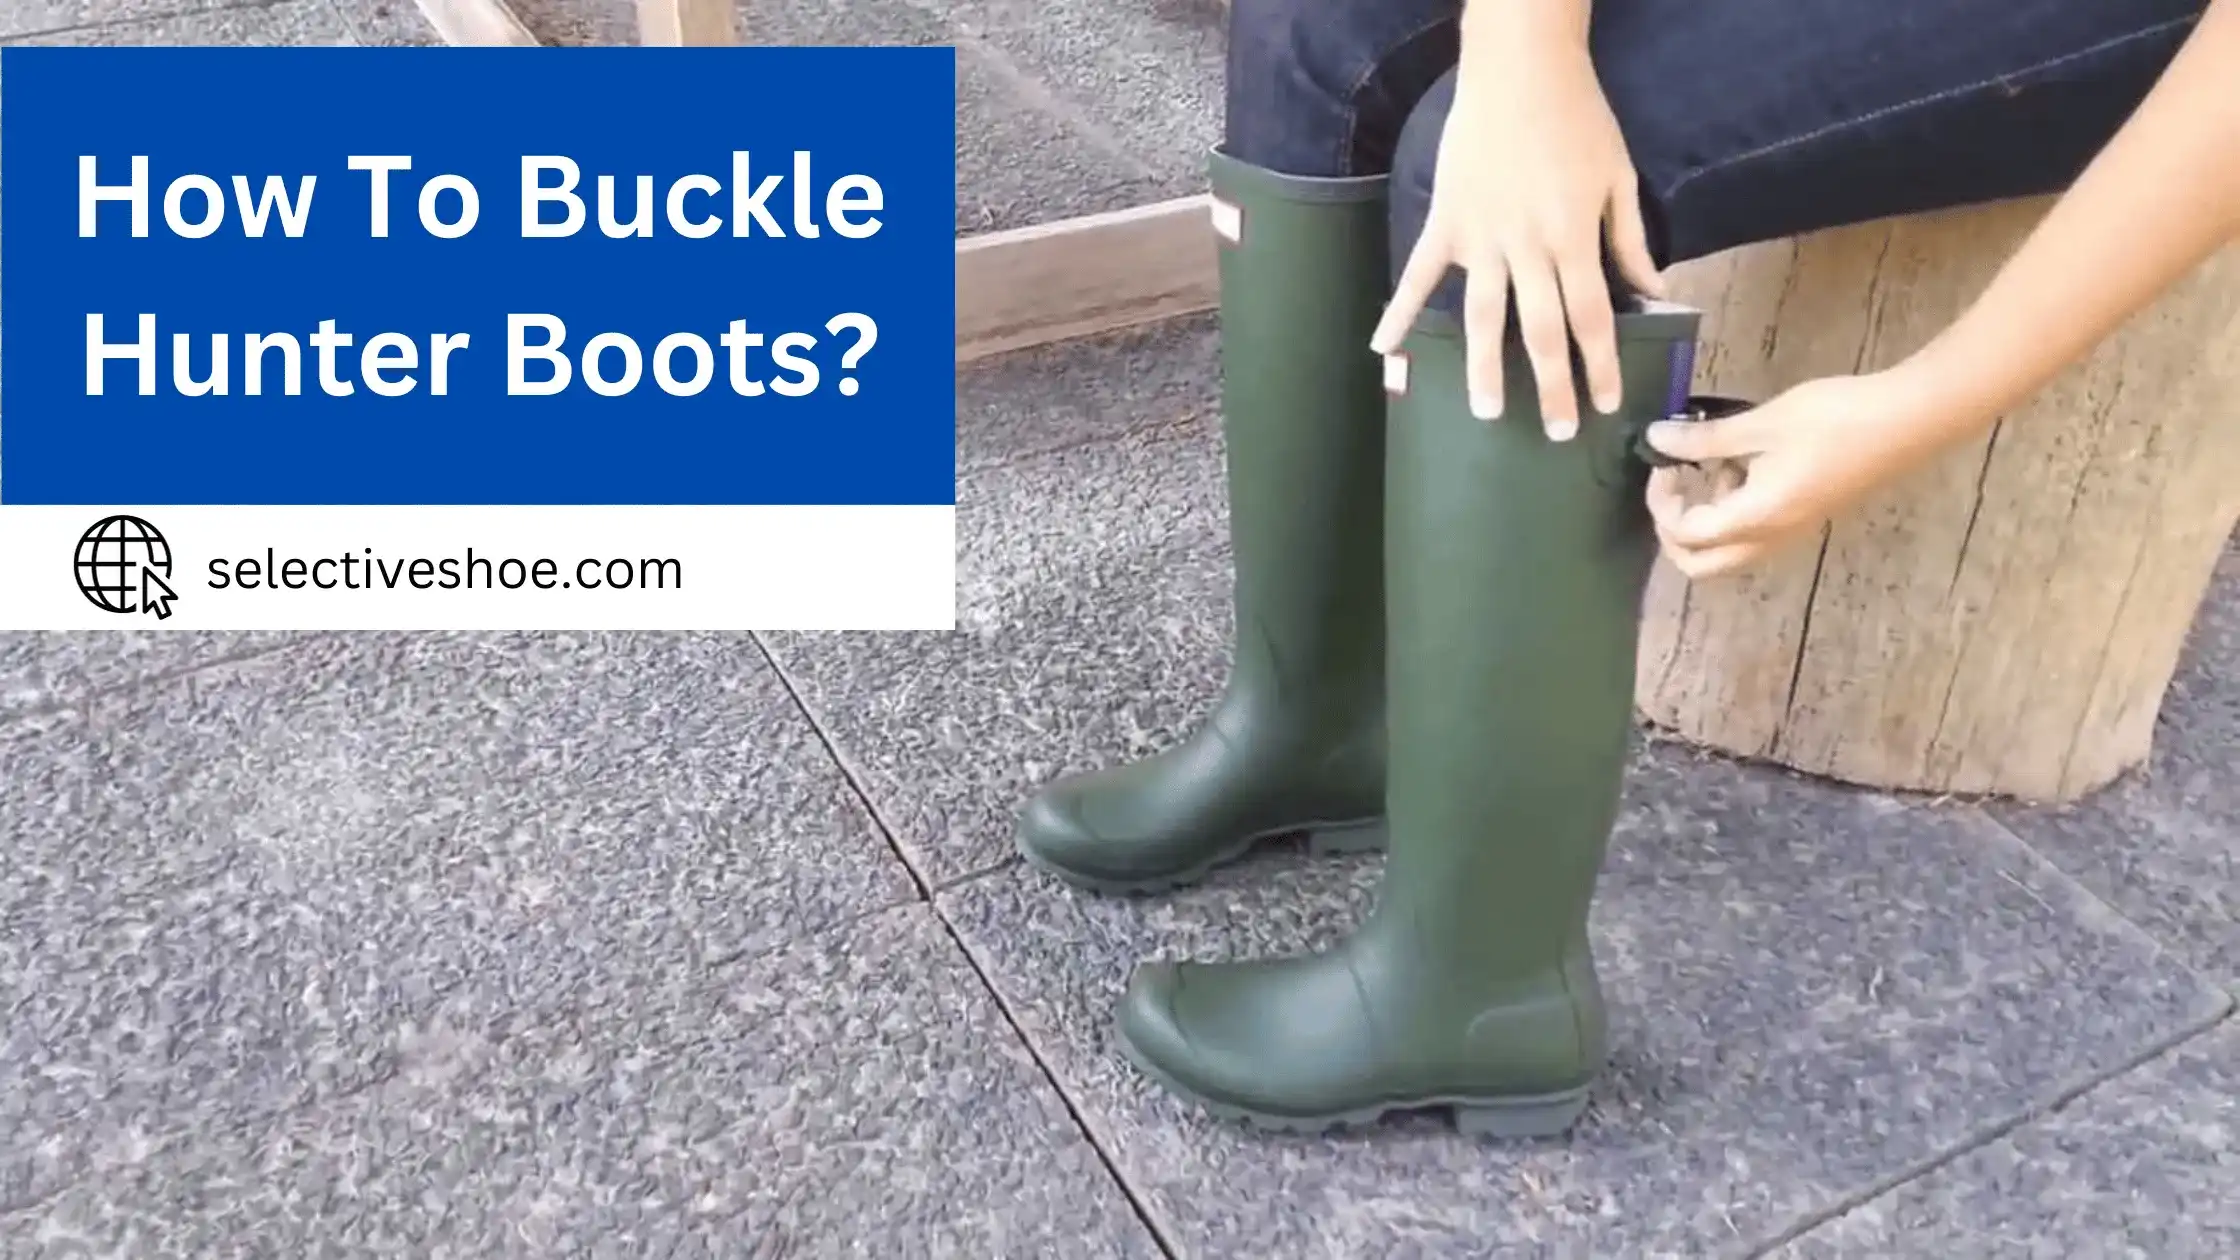 How To Buckle Hunter Boots? Easy Guide For Everyone